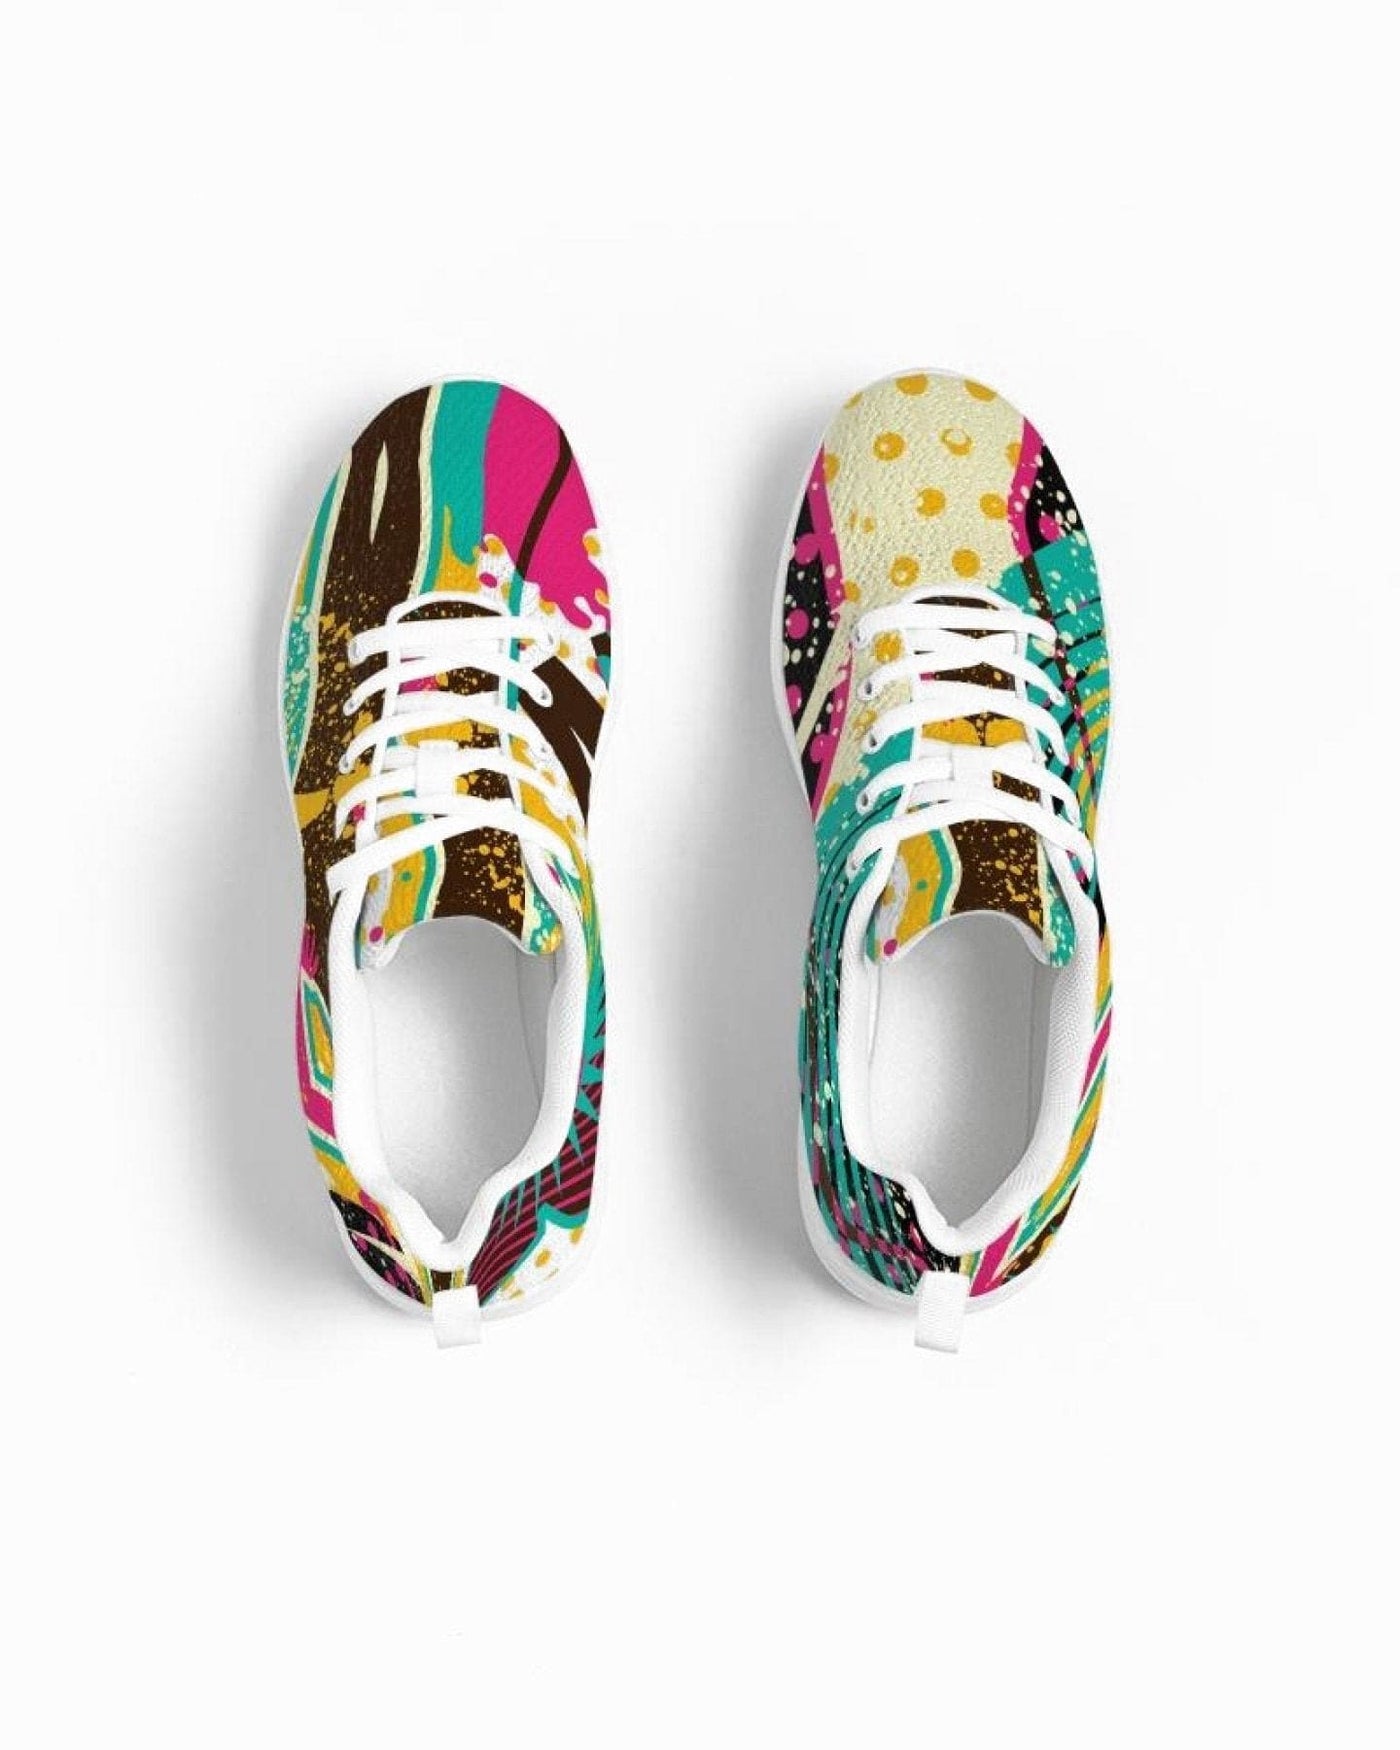 Womens Sneakers - Canvas Running Shoes Multicolor Pop Print